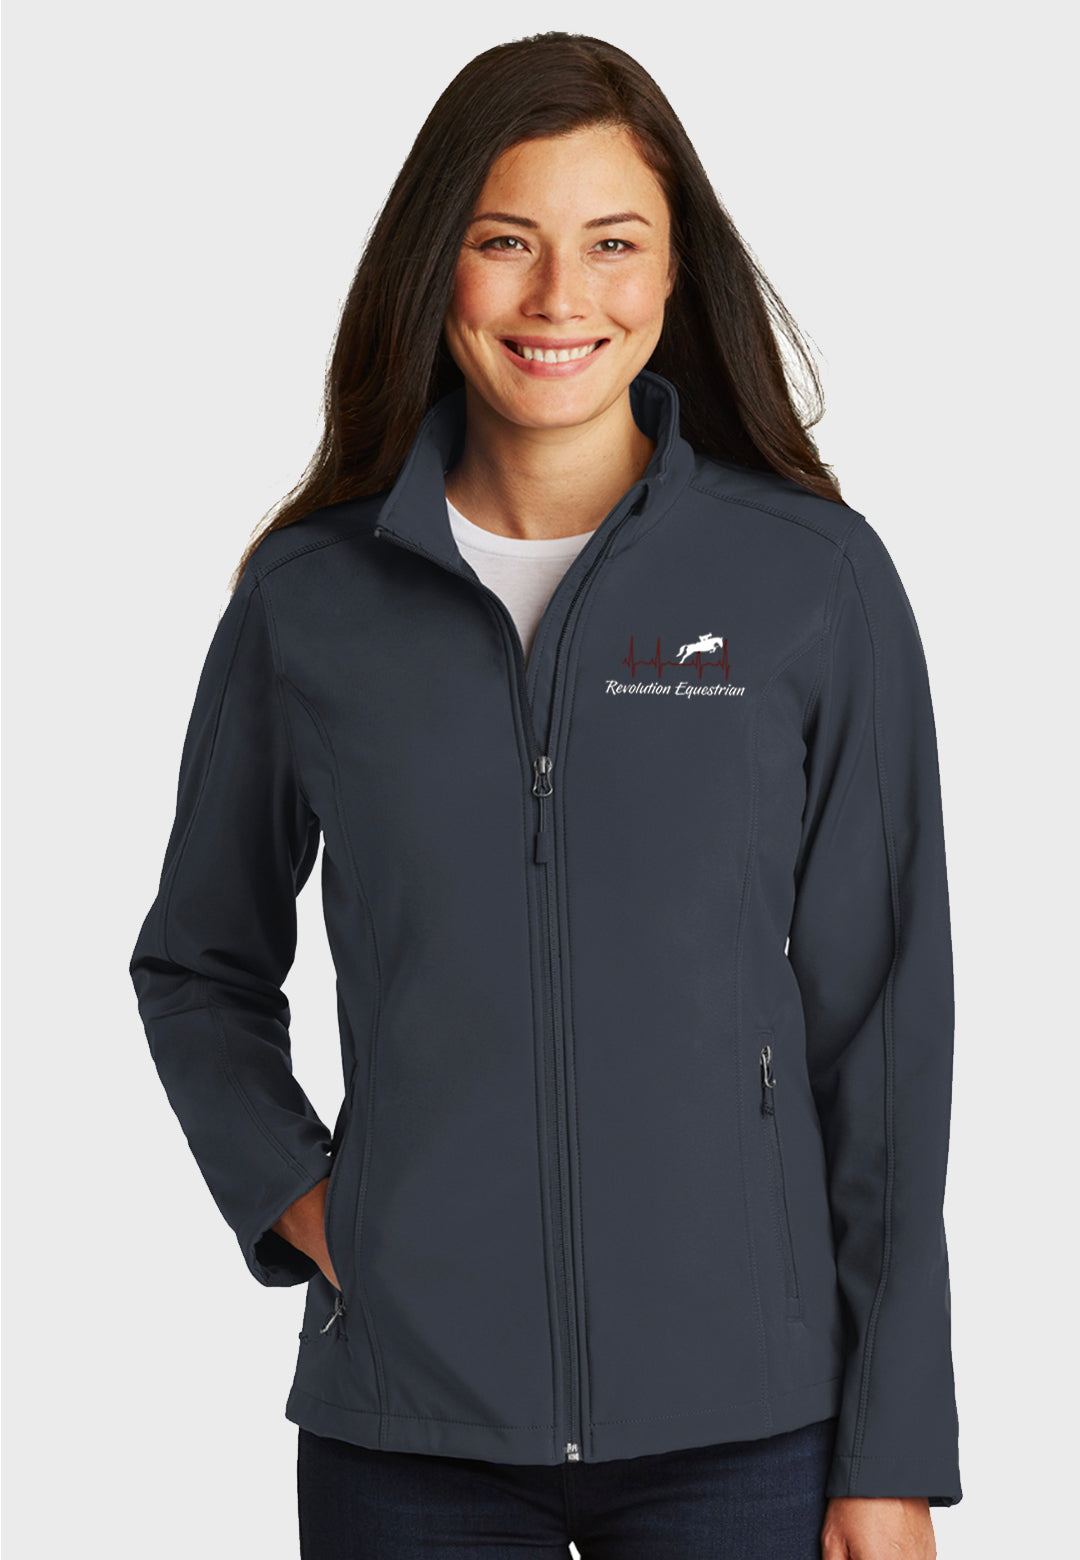 Revolution Equestrian Port Authority® Core Soft Shell Jacket - Ladies/Youth Sizes, 2 Color Options